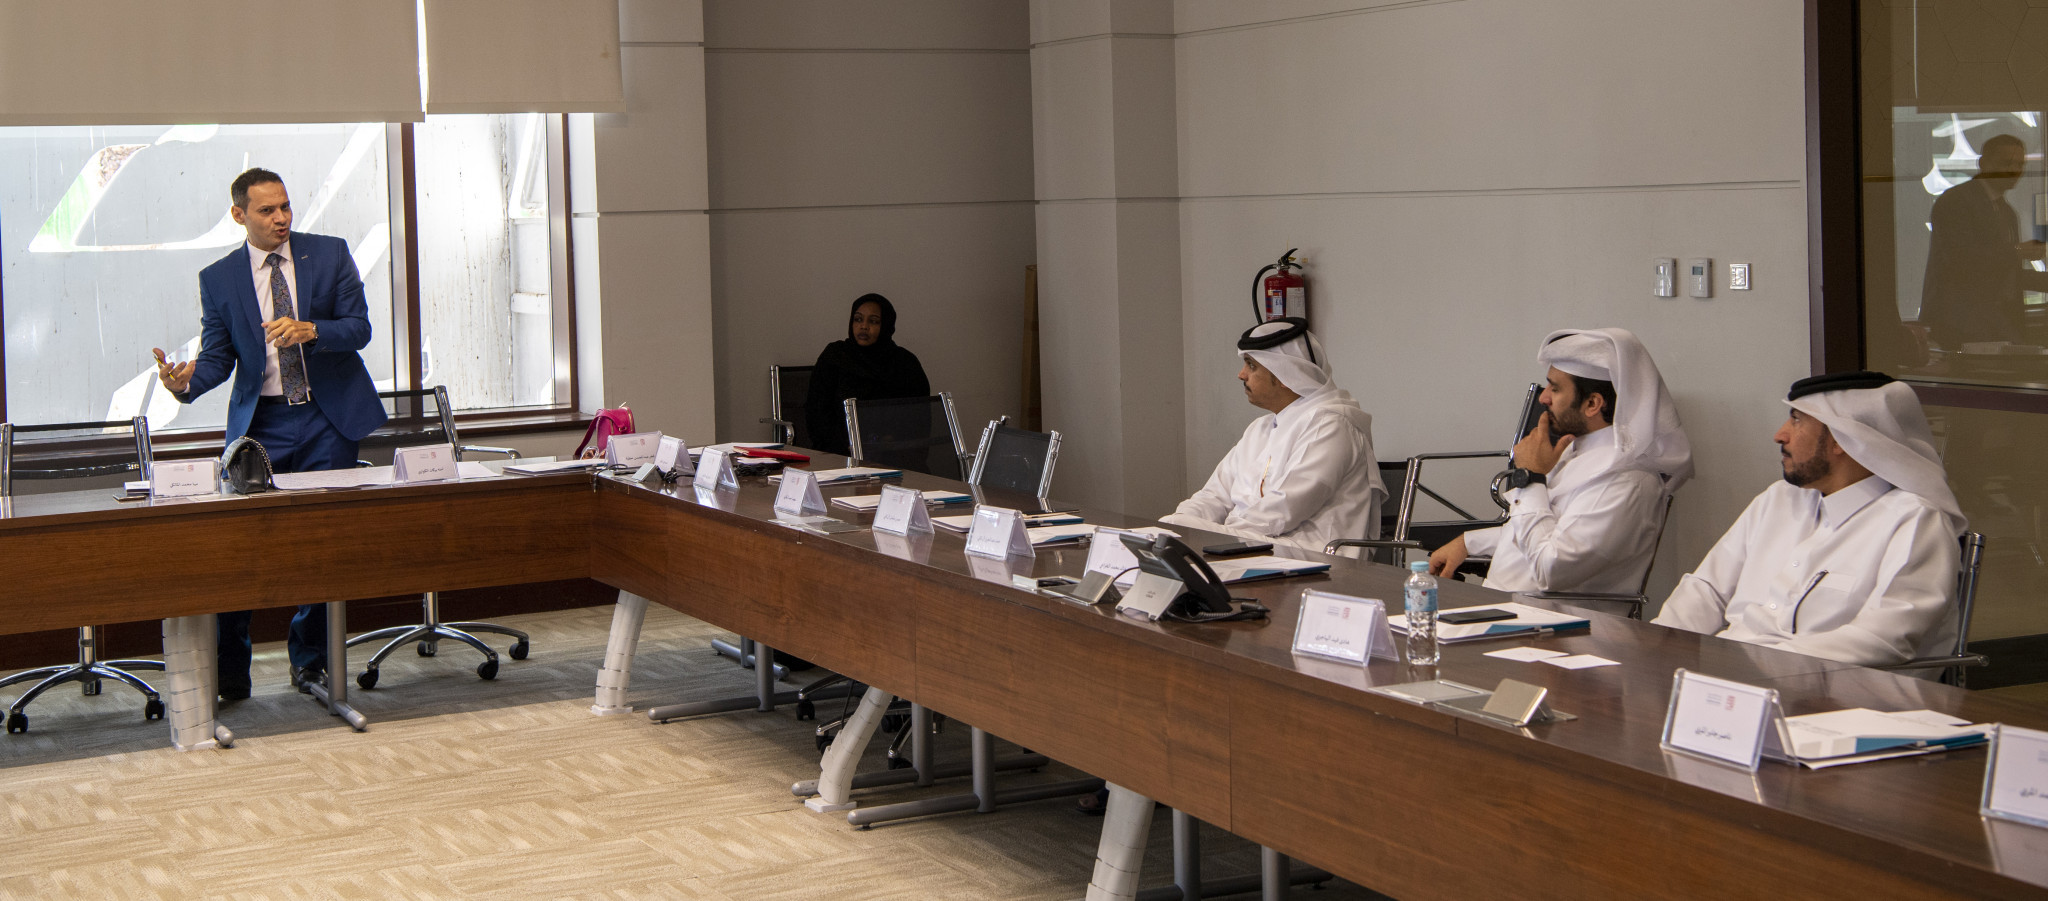 Qatar Olympic Committee stages leadership programme designed to help it meet its goals